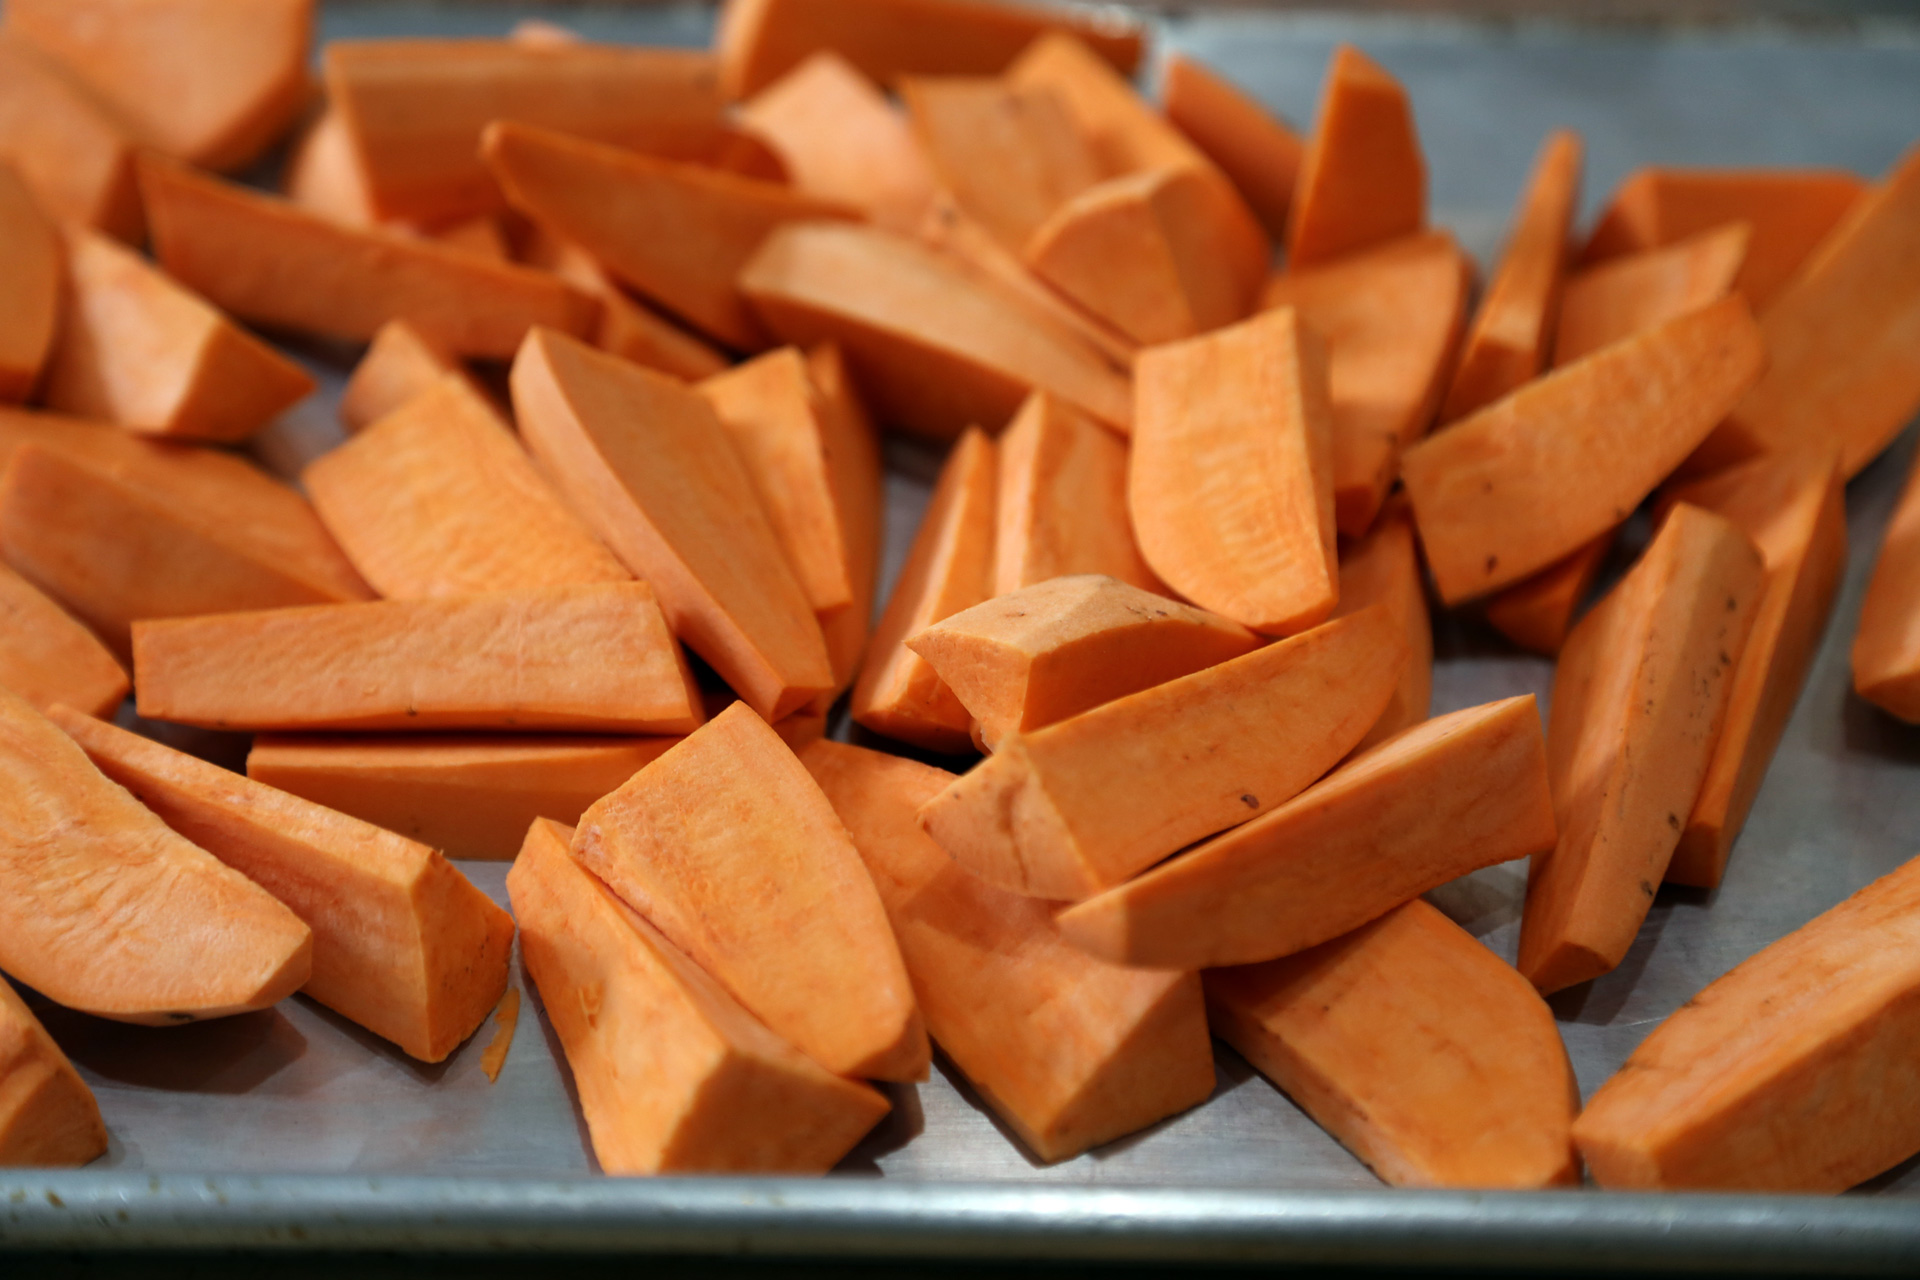 Cut the yams in half crosswise, then cut into equal-sized wedges, each about 1 by 3 inches.